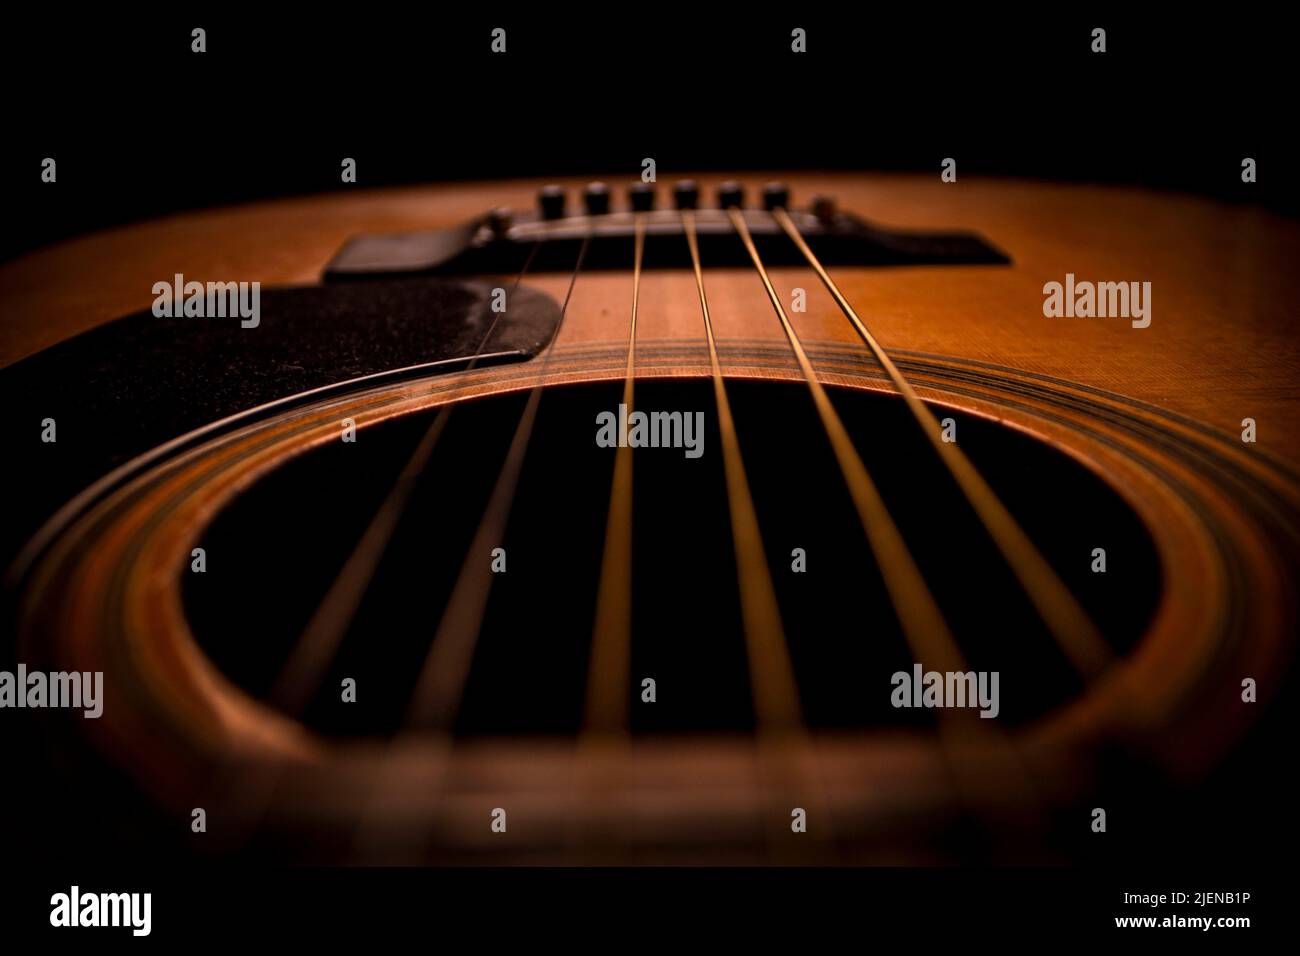 Guitar.Guitar's chords.Acoustic guitar.Music.Music background.Image of an acoustic guitar in the dark.Playing guitar music. Acoustic guitar chords. Stock Photo